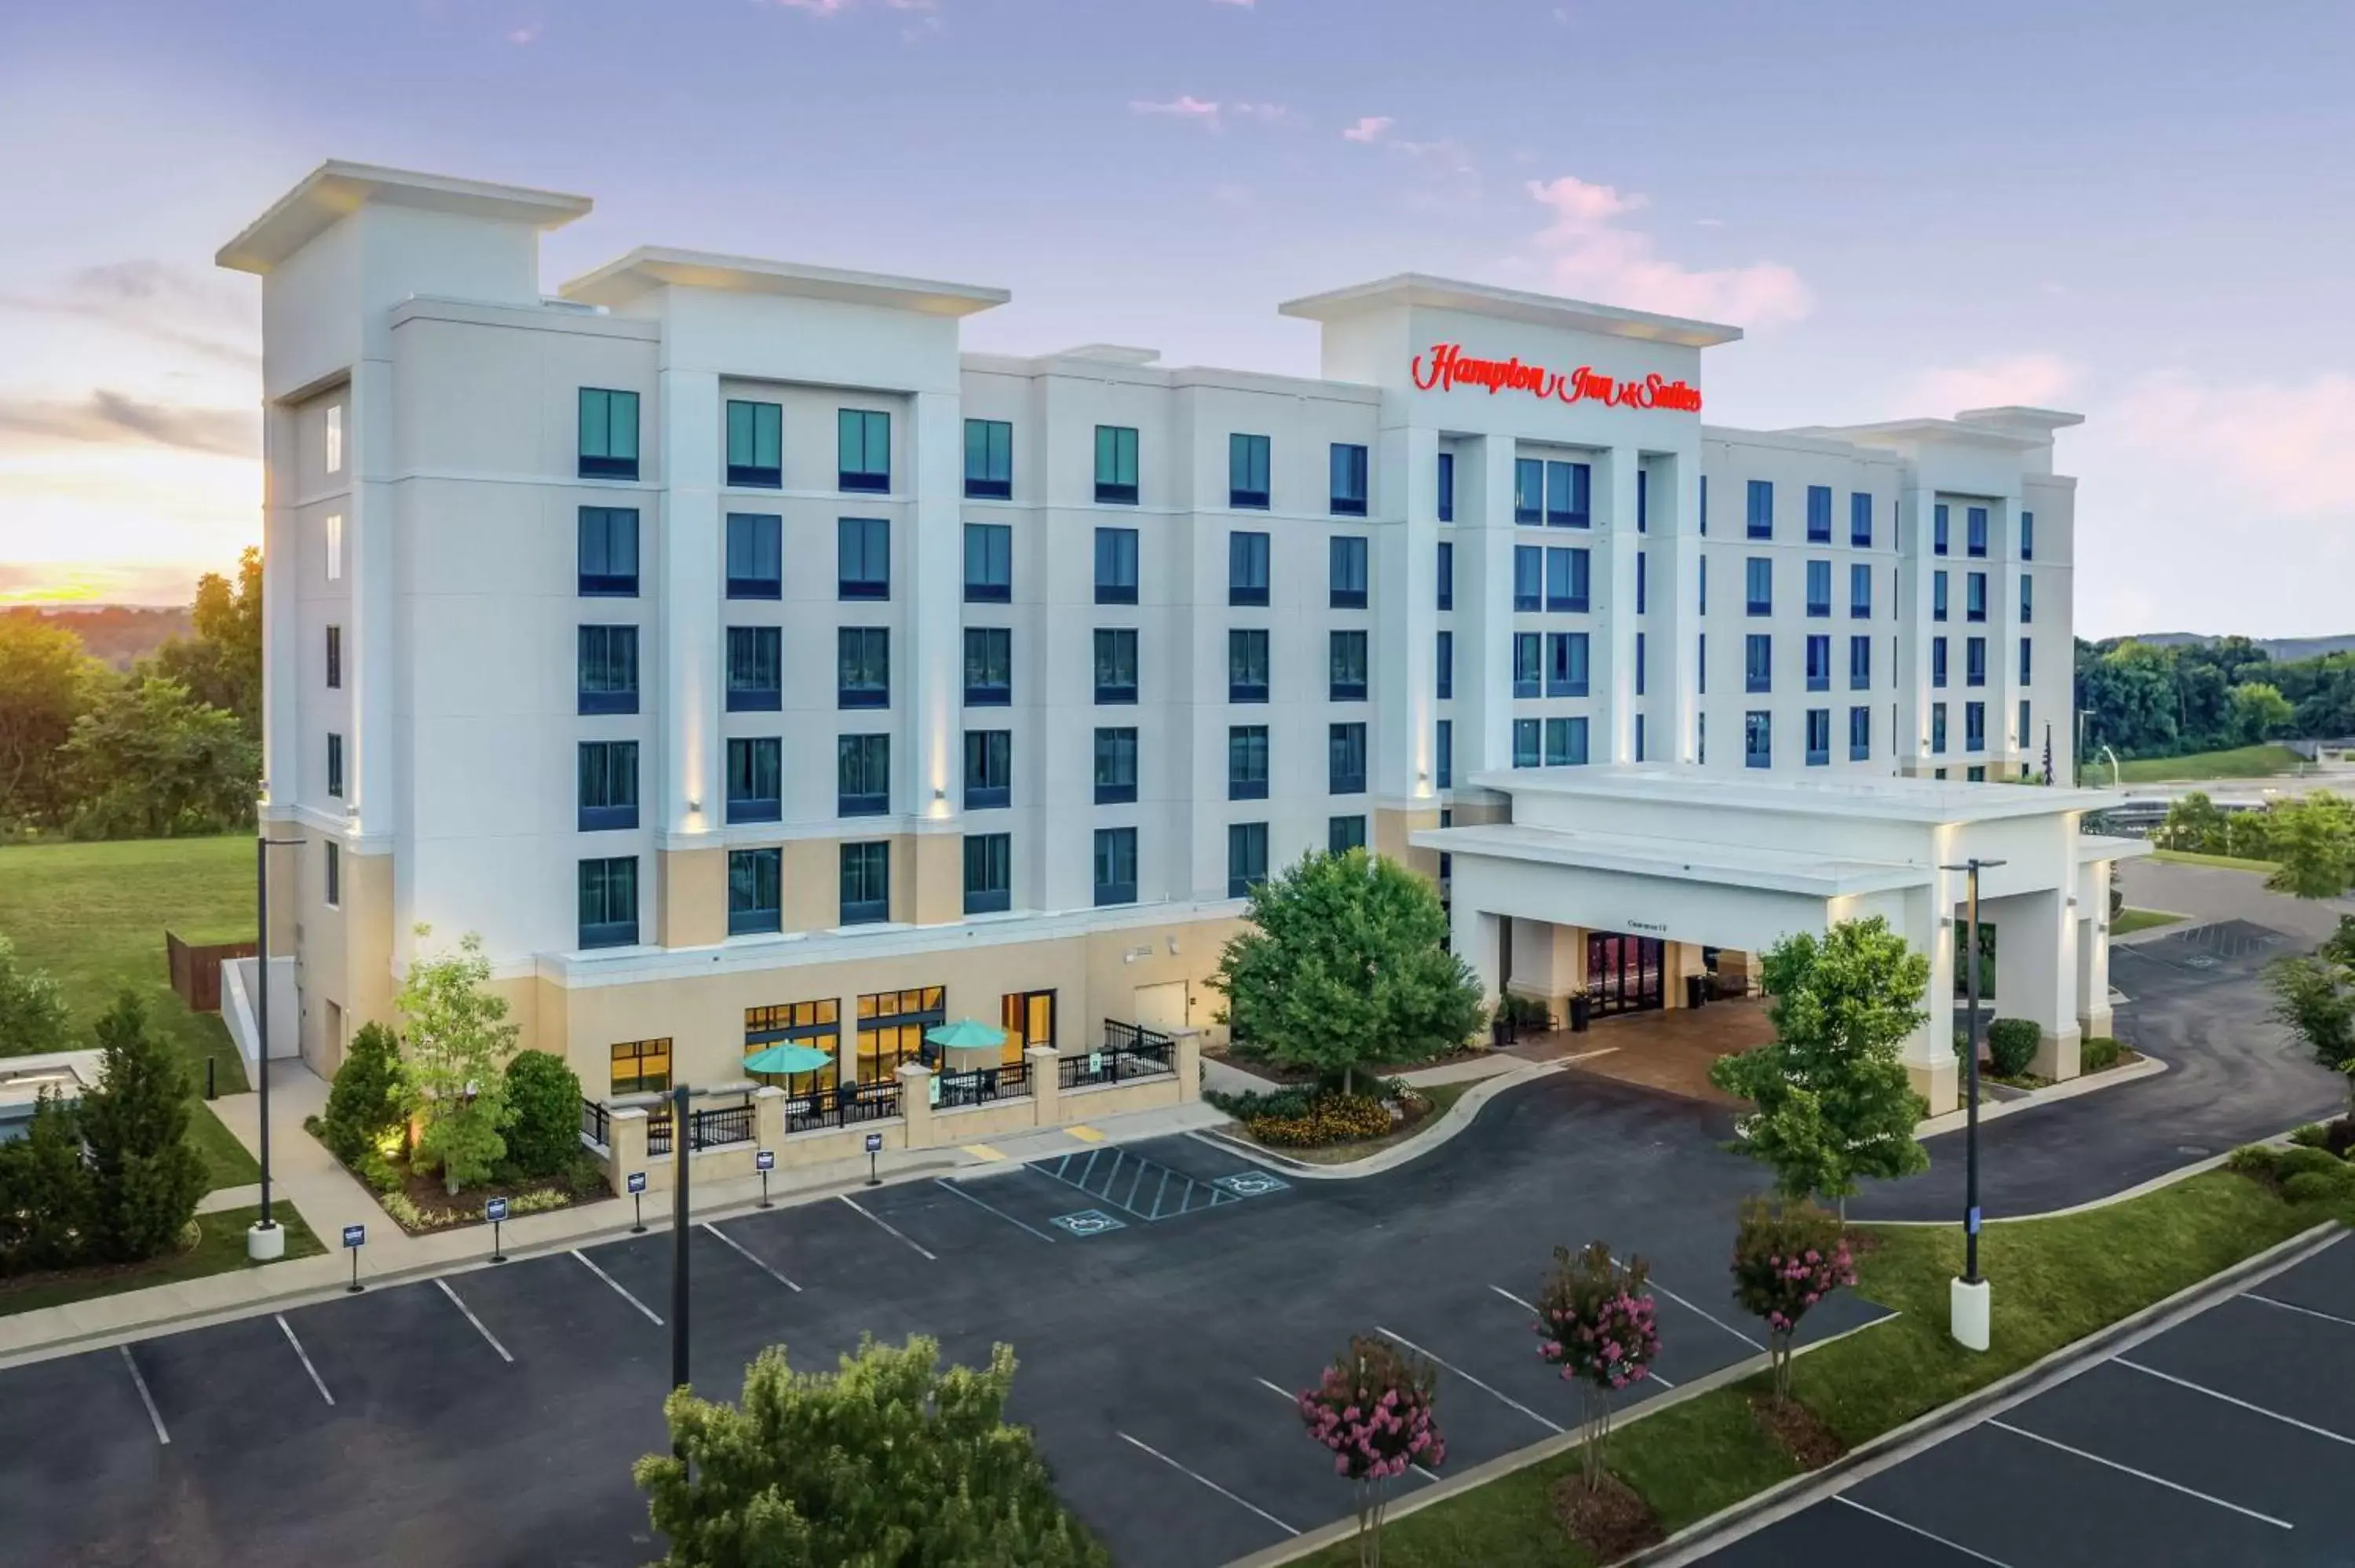 Property Building in Hampton Inn & Suites Chattanooga/Hamilton Place